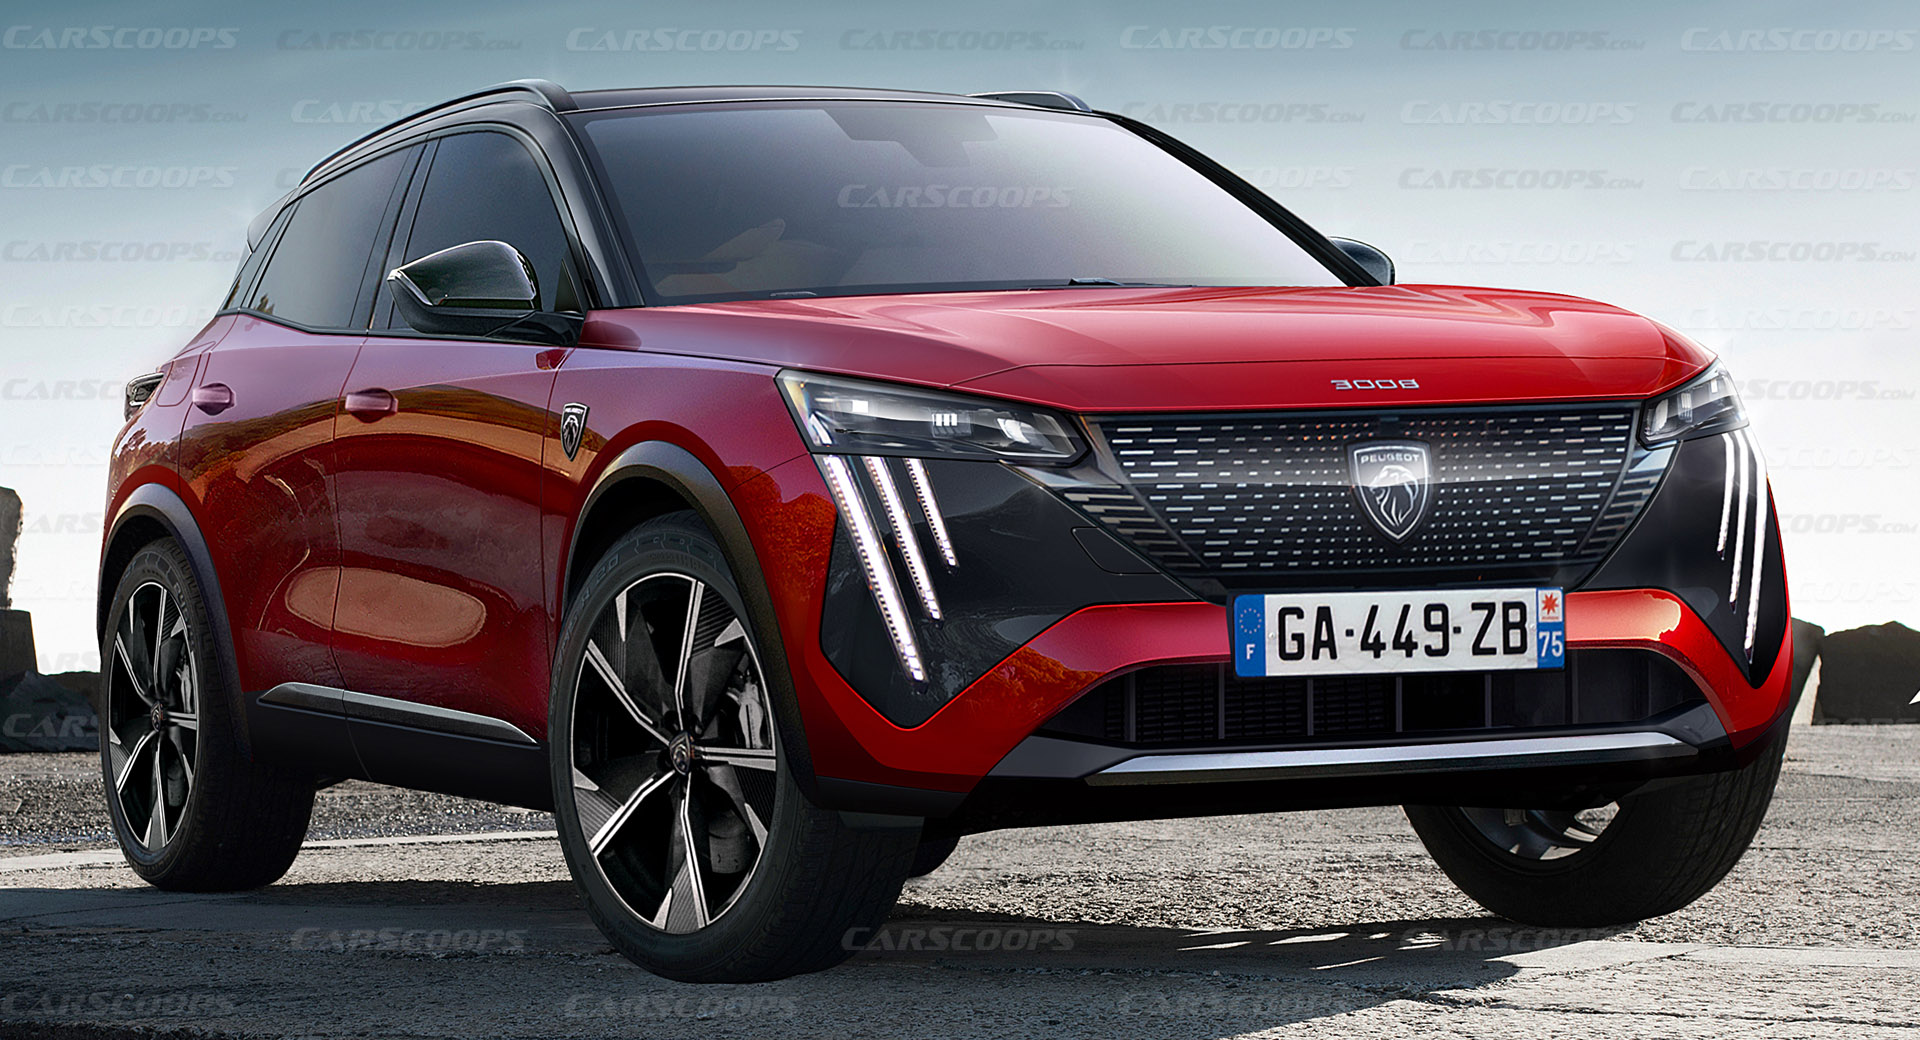 2023 Peugeot 3008 Coming To Reclaim Compact SUV Crown |